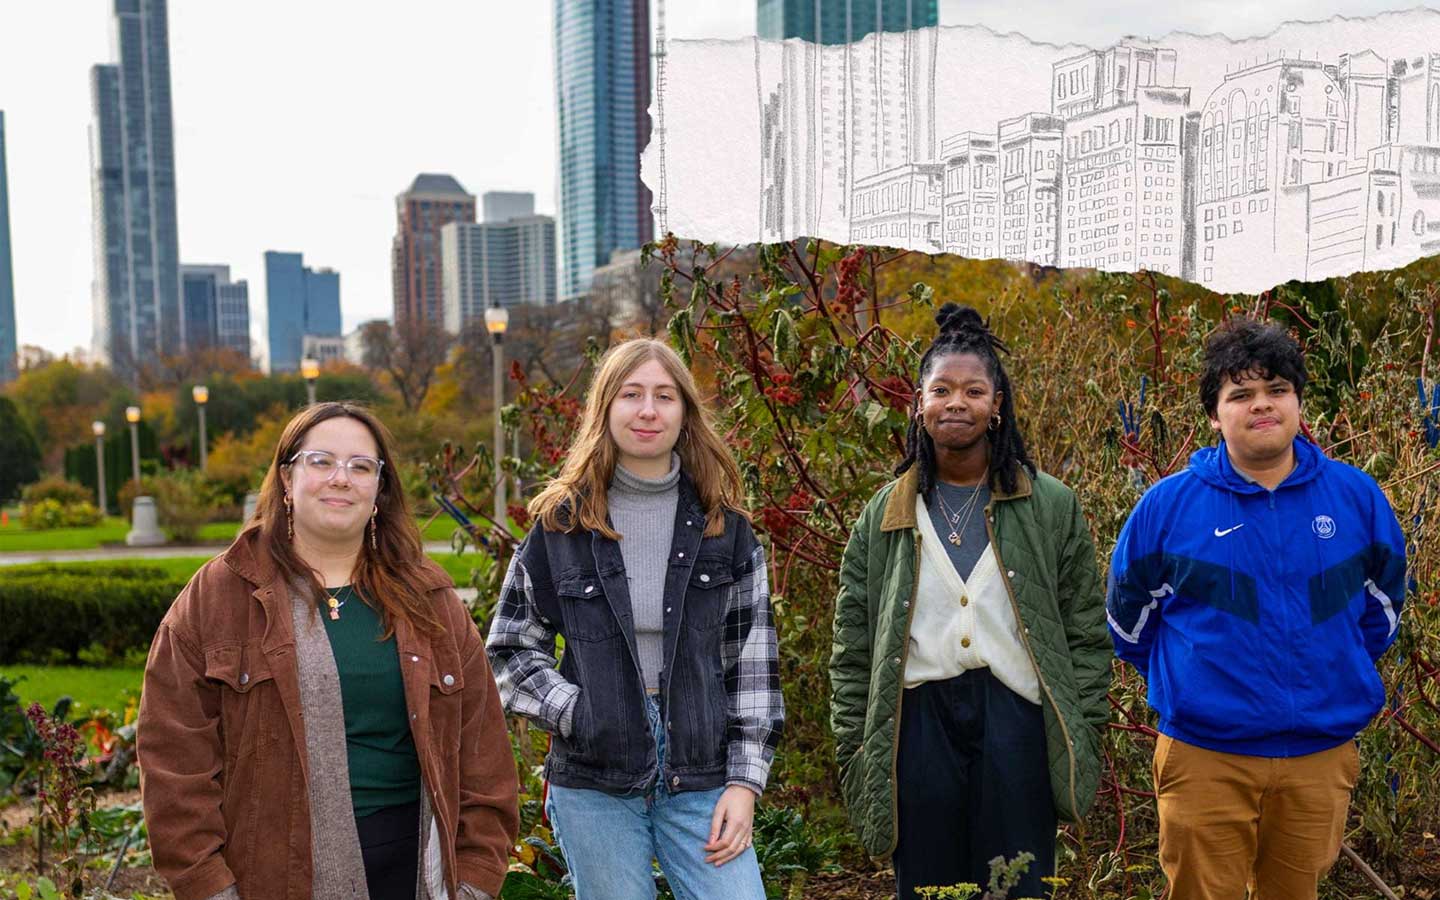 Honors Program students stand in Grant Park with a partially illustrated Chicago skyline behind them